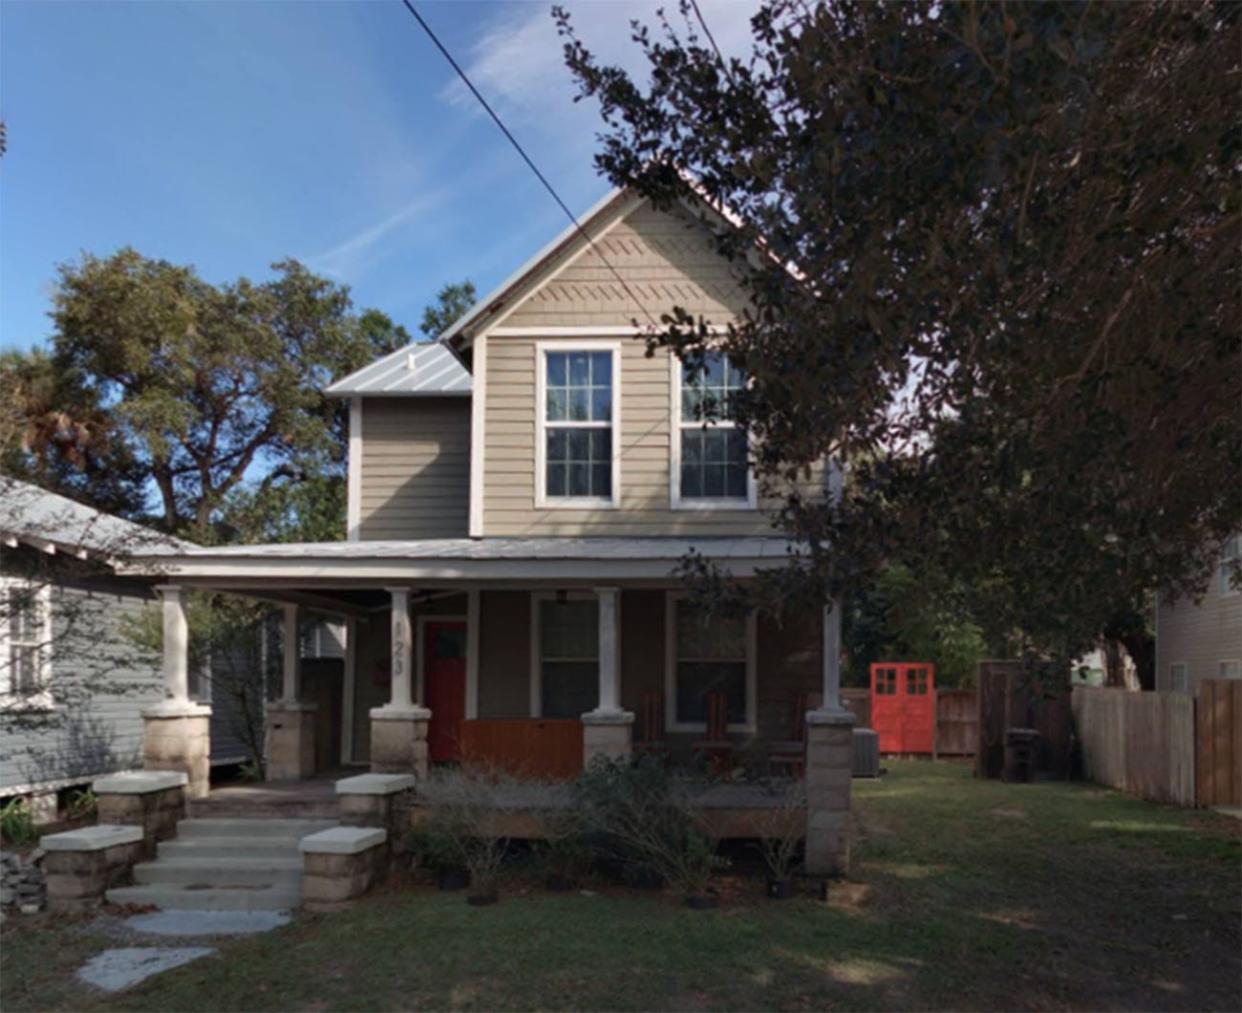 123 Twine St. in St. Augustine was sold to Dellwood Ventures 1 LLC for $375,000 on Oct. 1.